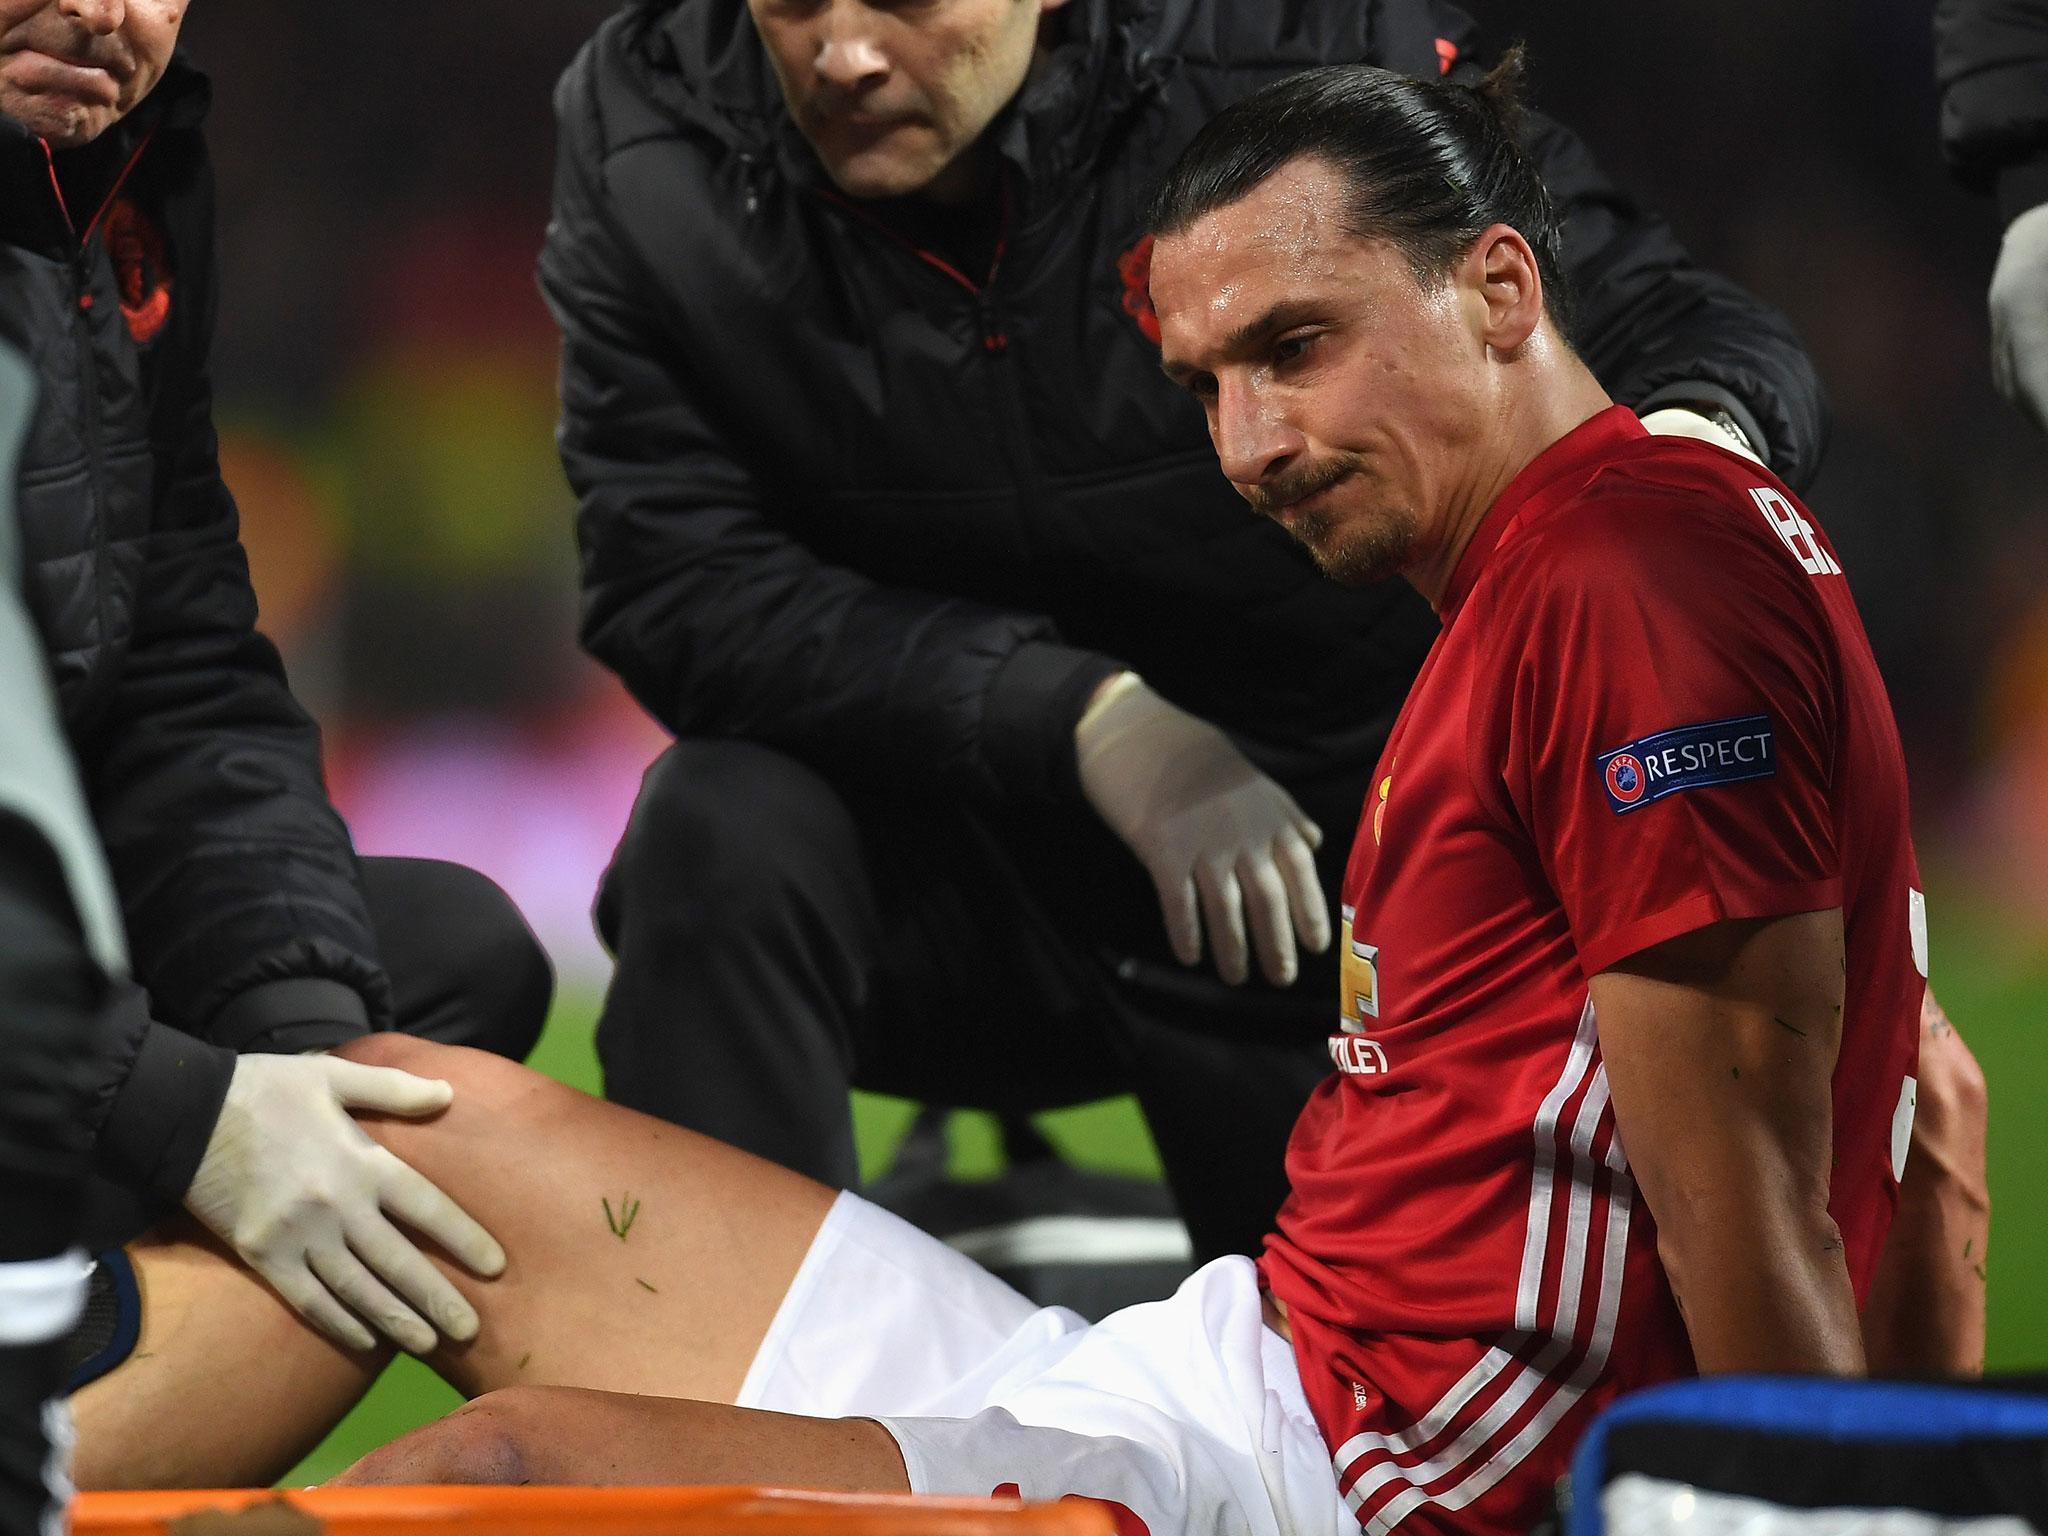 Zlatan Ibrahimovic is not expected to play again until 2018